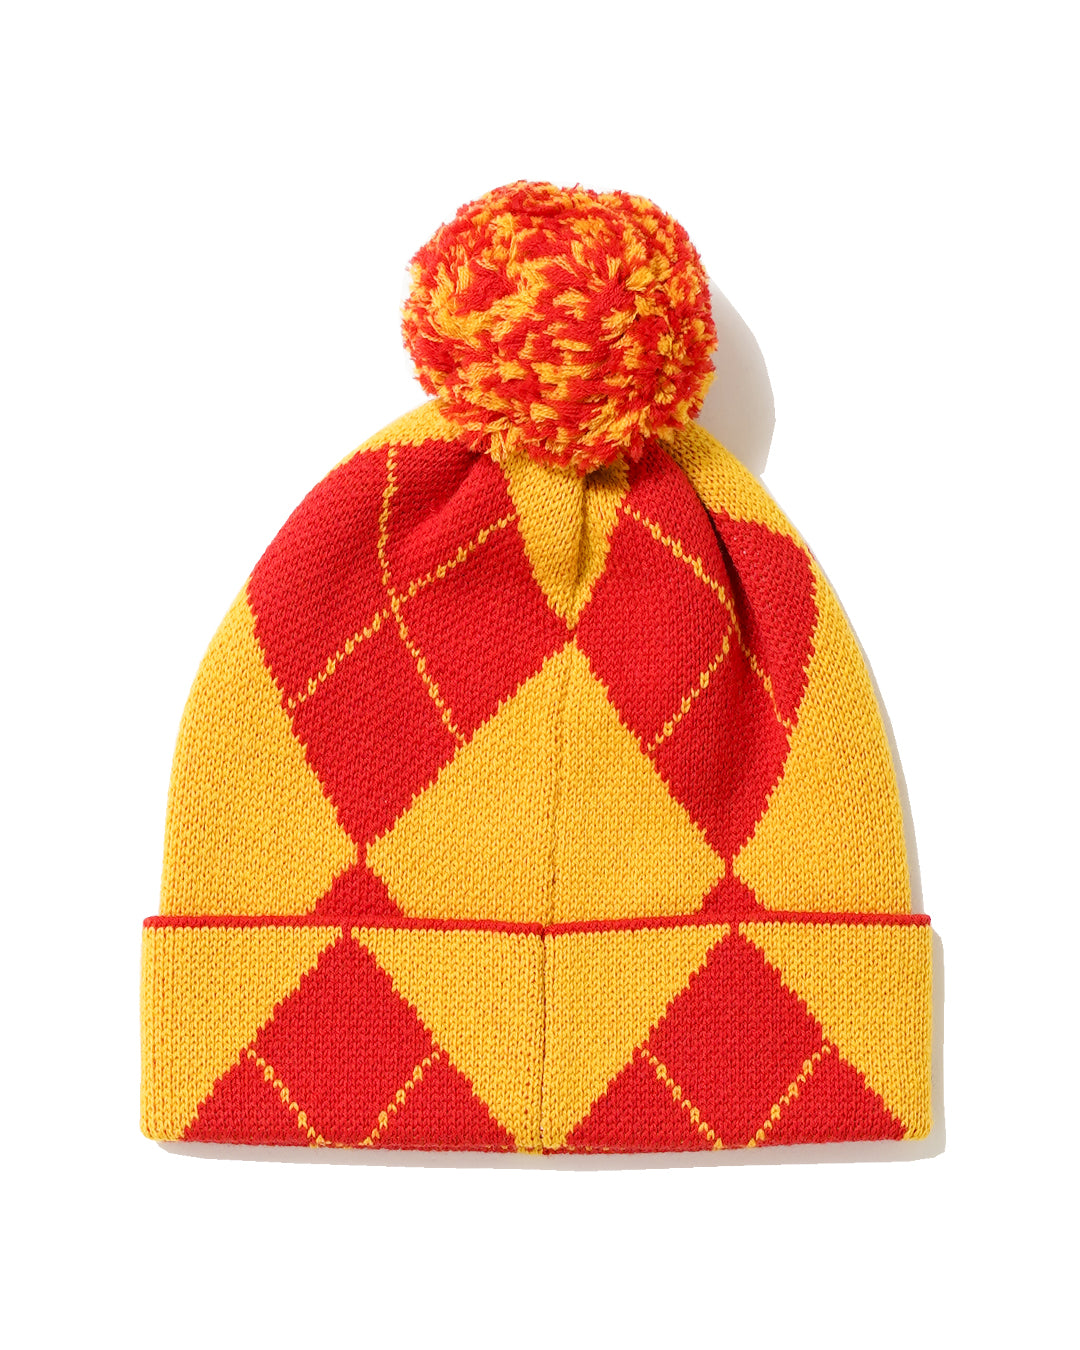 ARLEQUIN BEANIE ESCUDO EMBROIDERY/RED YELLOW